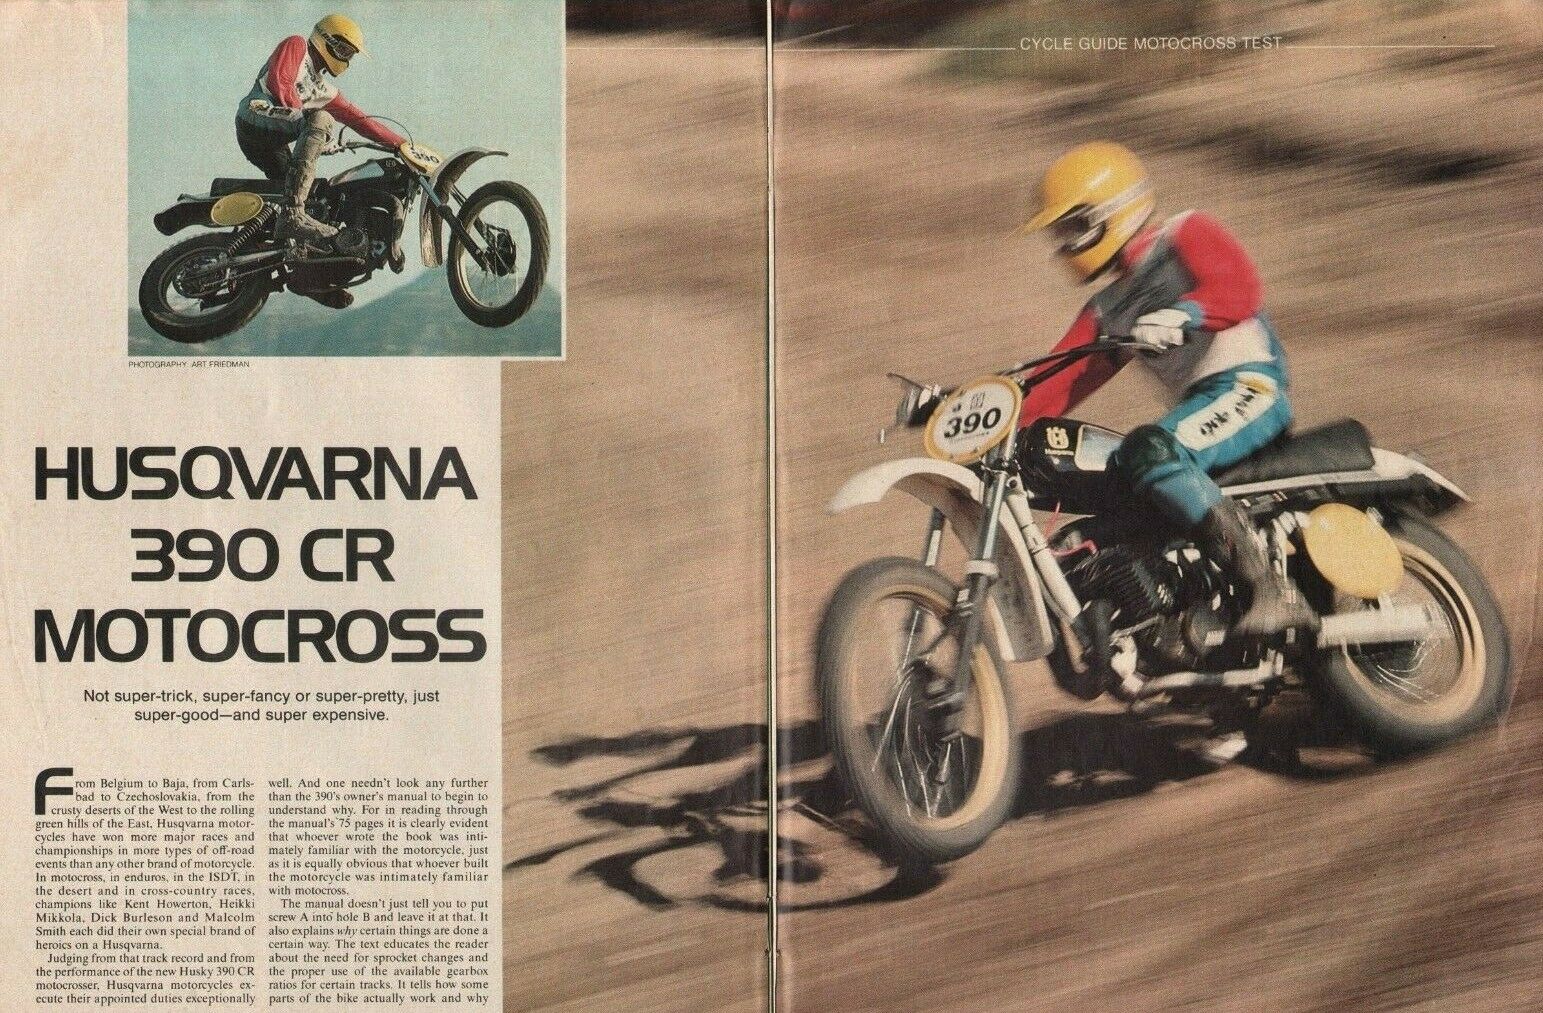 1978 Husqvarna 390 Cr Motocross - 7-page Vintage Motorcycle Road Test Article